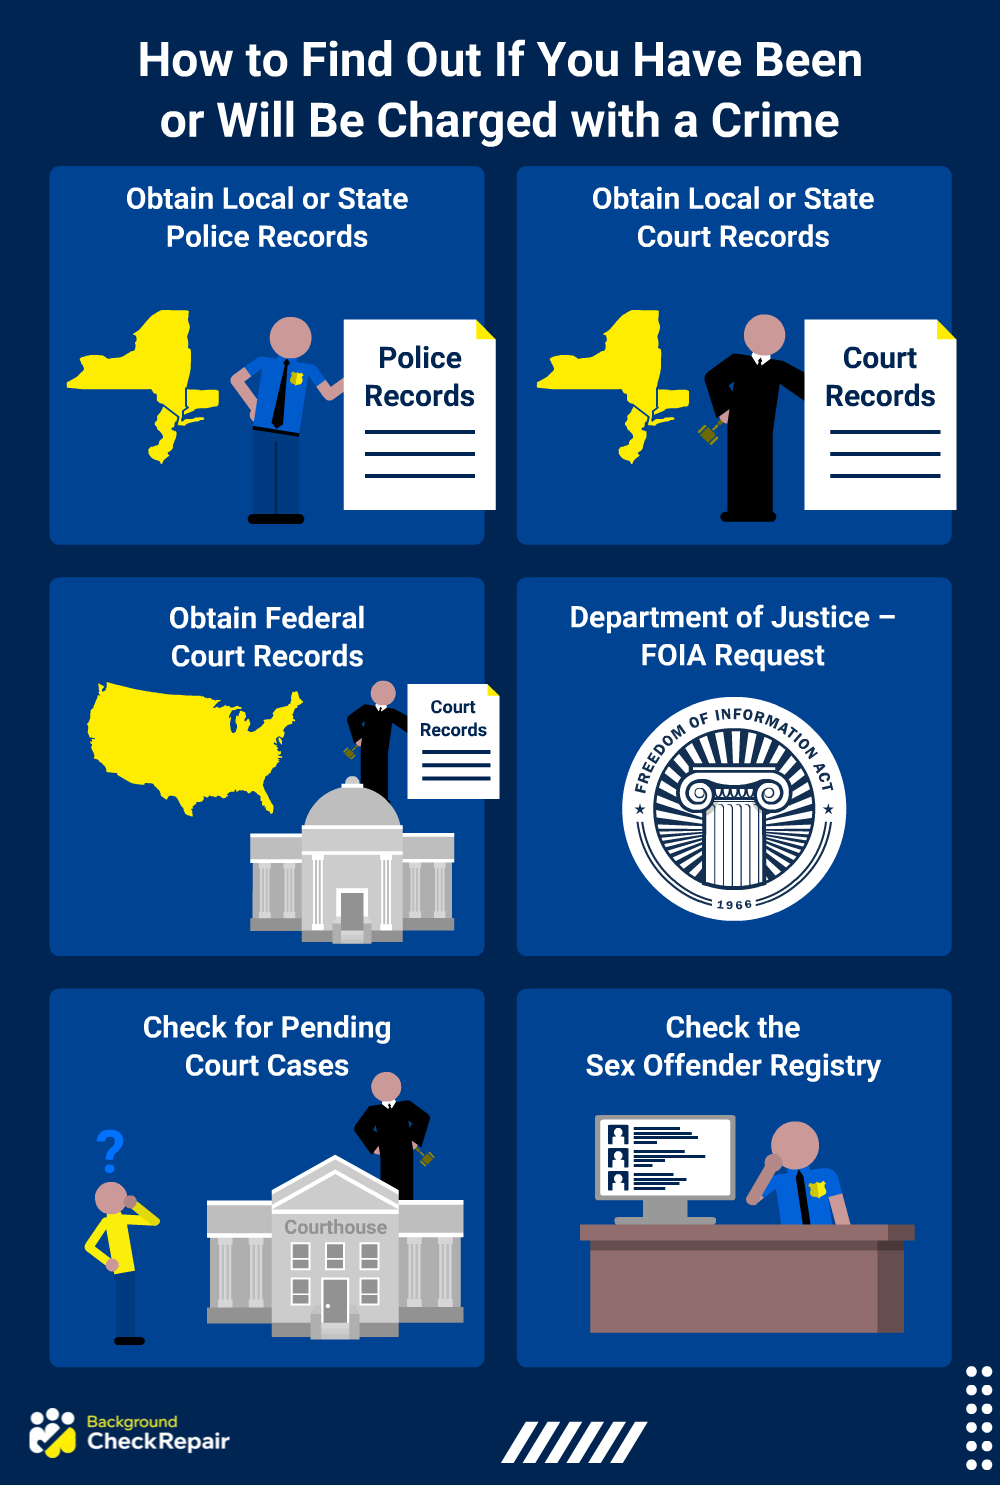 Graphic showing how to find out if you have been or will be charged with a crime, including searching state and local police and court records, as well as federal records requests and checking for pending cases to avoid the can you be charged with a crime without knowing scenario. 